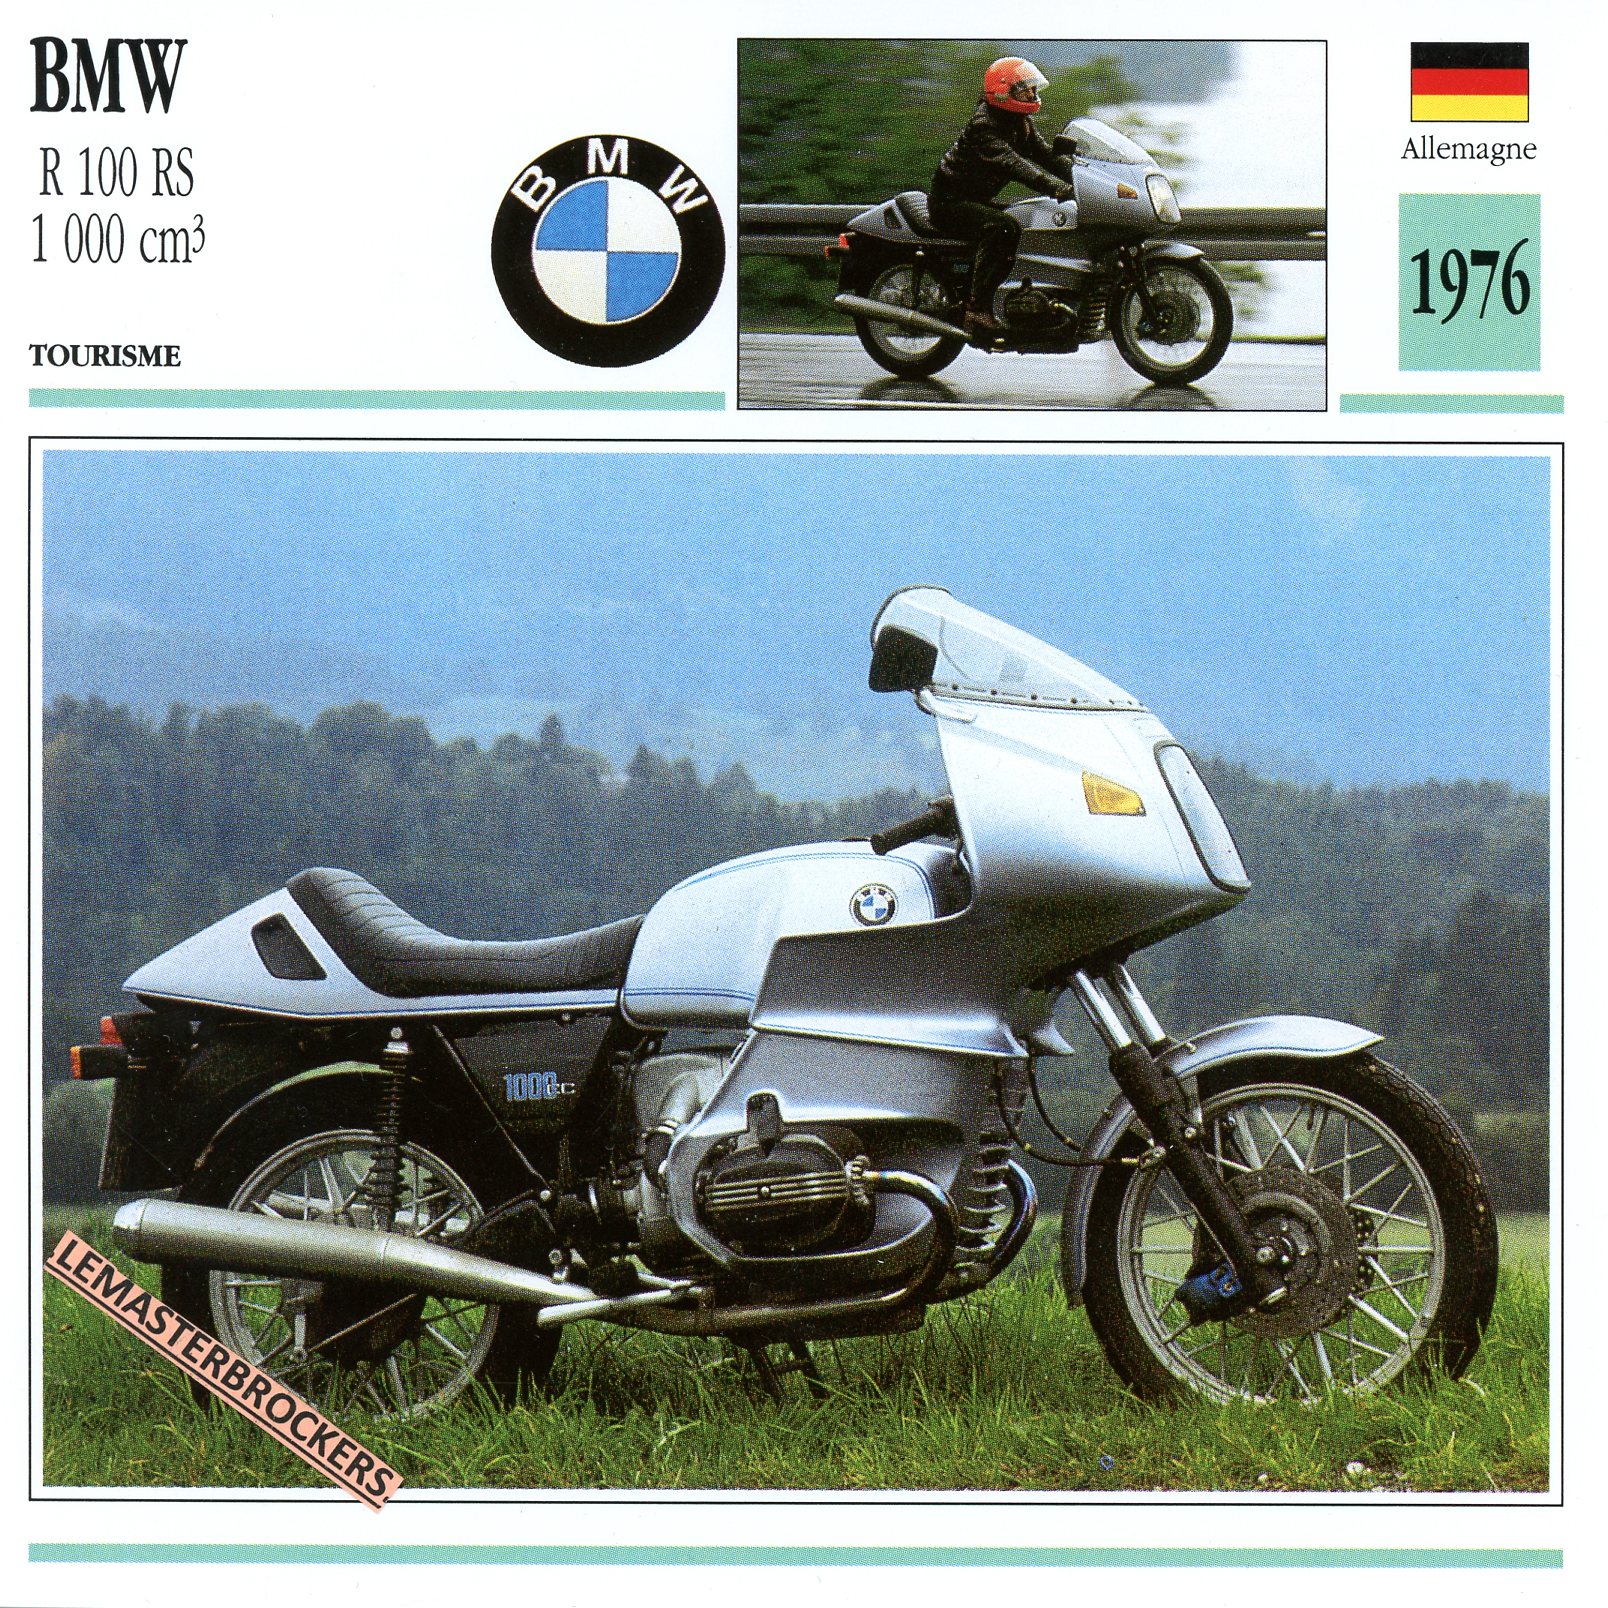 FICHE-MOTO-BMW-R-R100RS-1976-LEMASTERBROCKERS-CARD-MOTORCYCLE